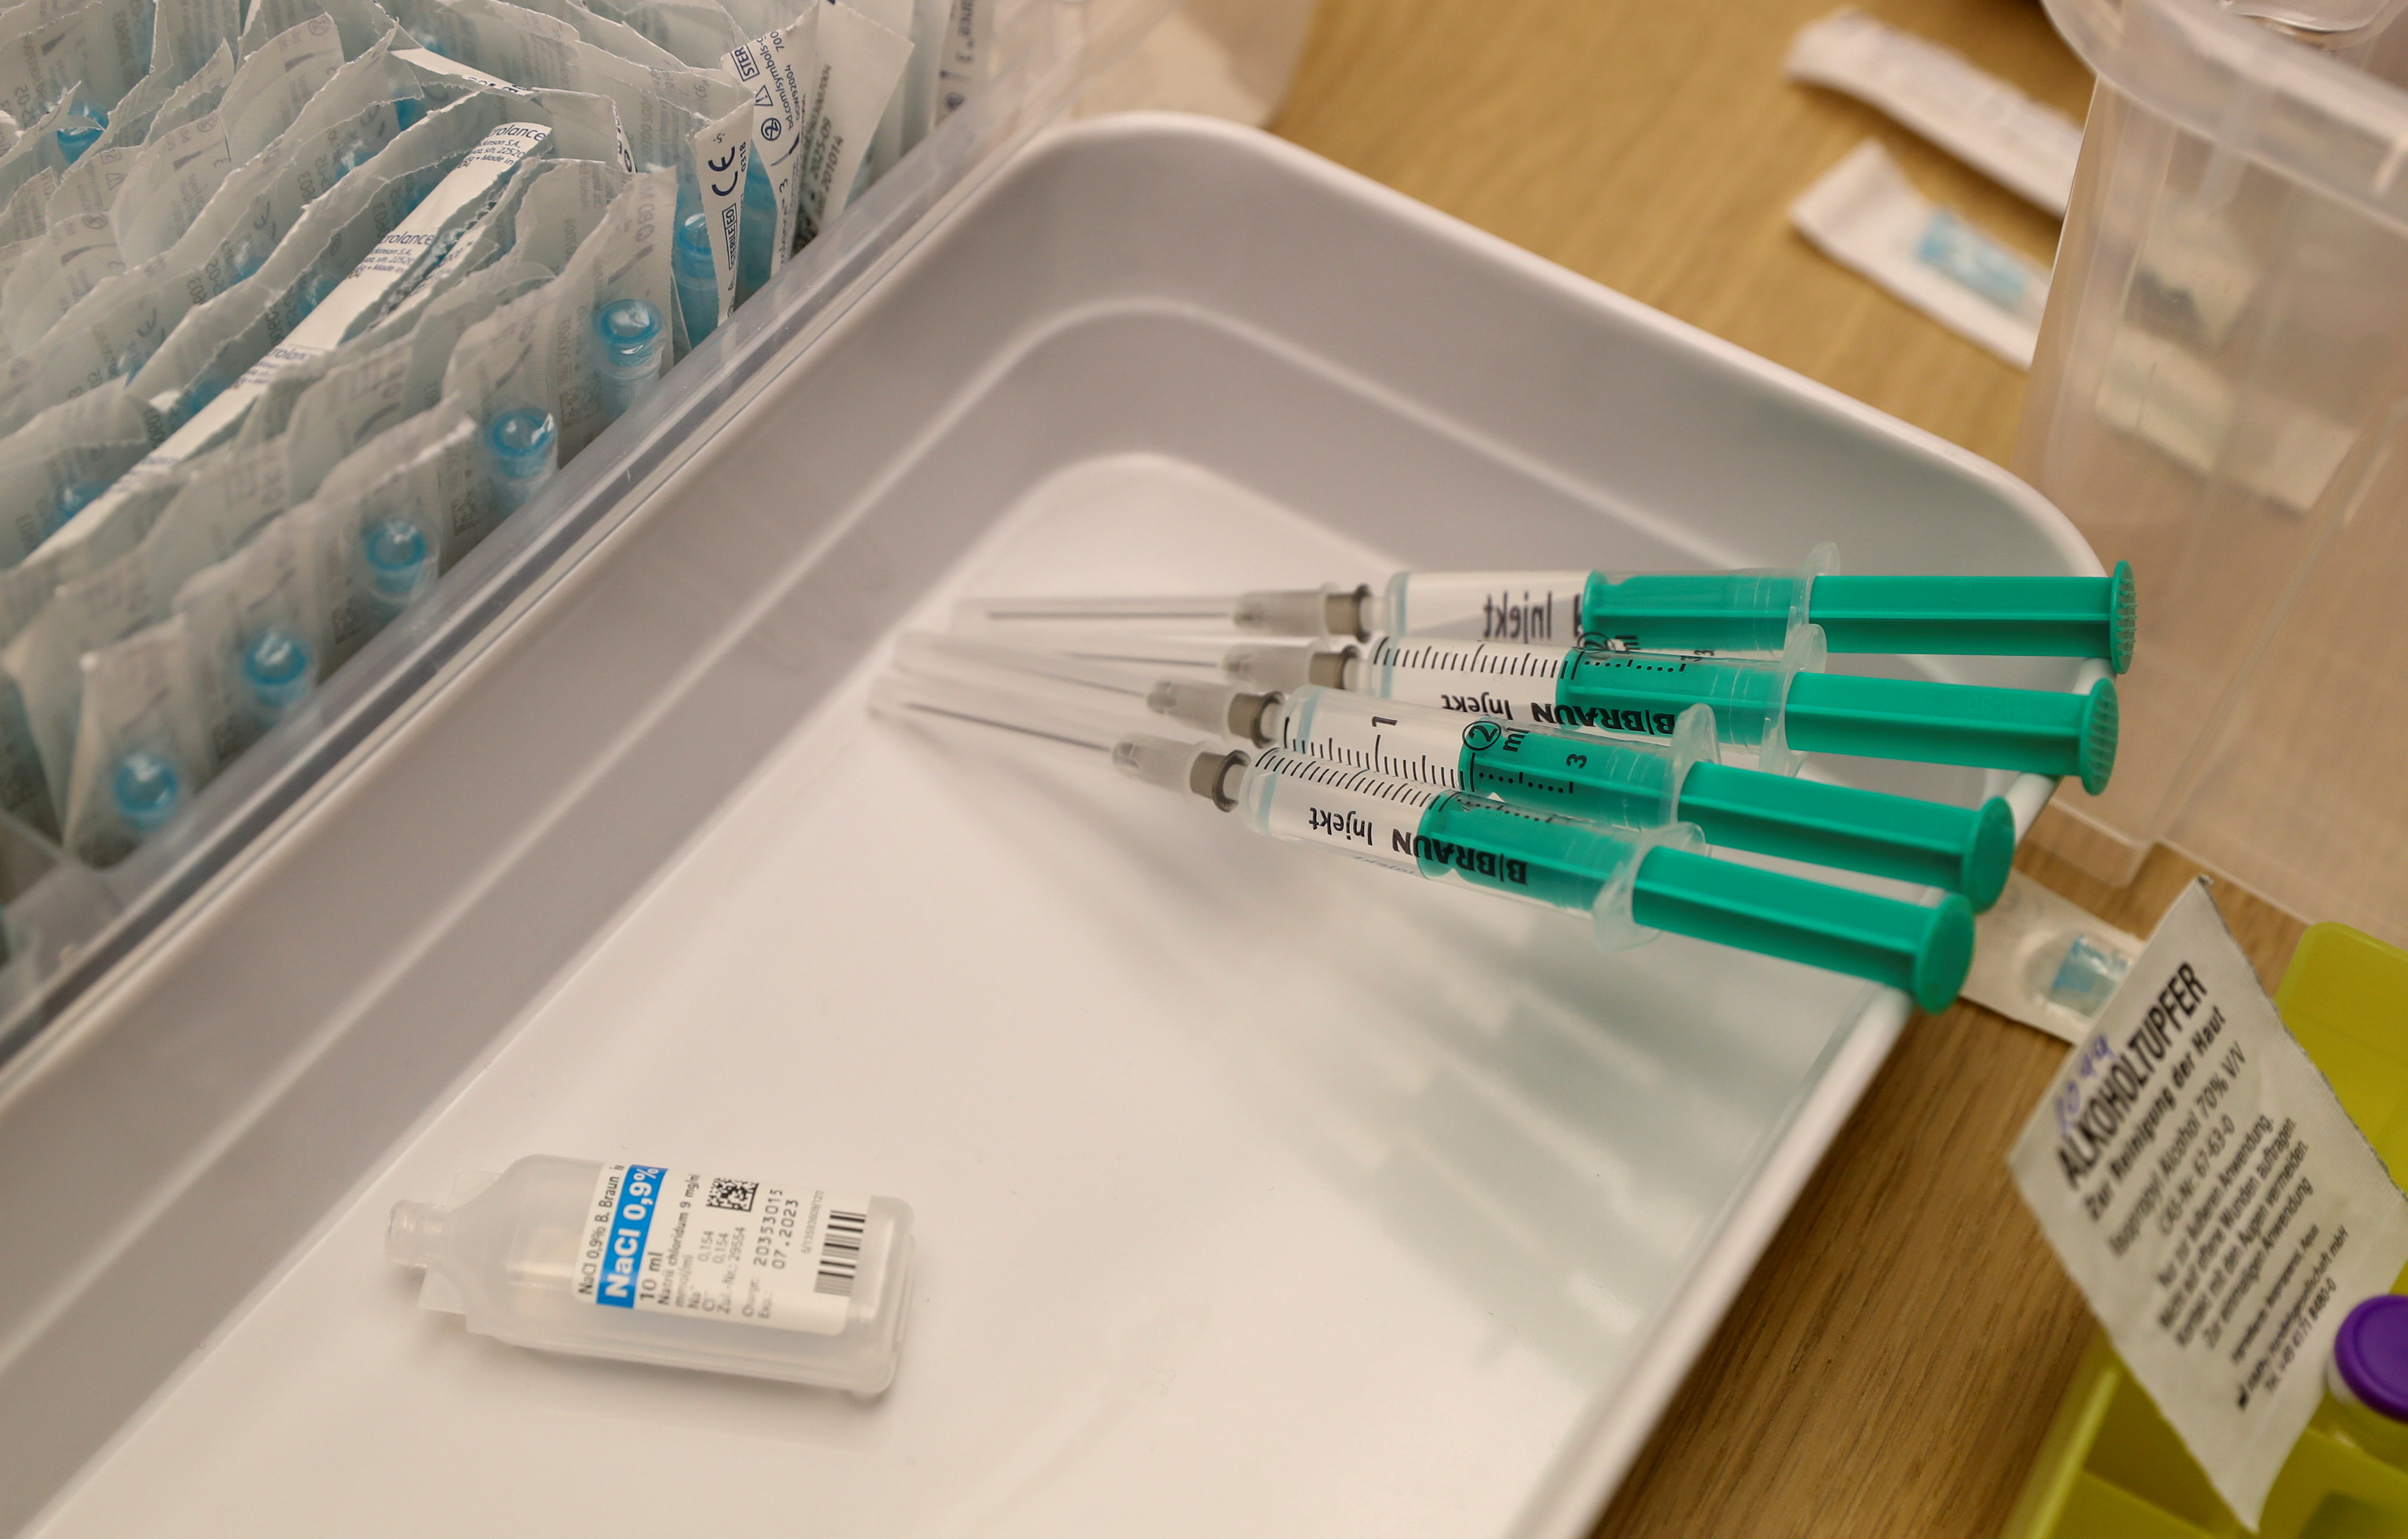 Syringes containing Pfizer-BioNTech vaccine are seen at the Impfzentrum Basel Stadt vaccination center in Basel